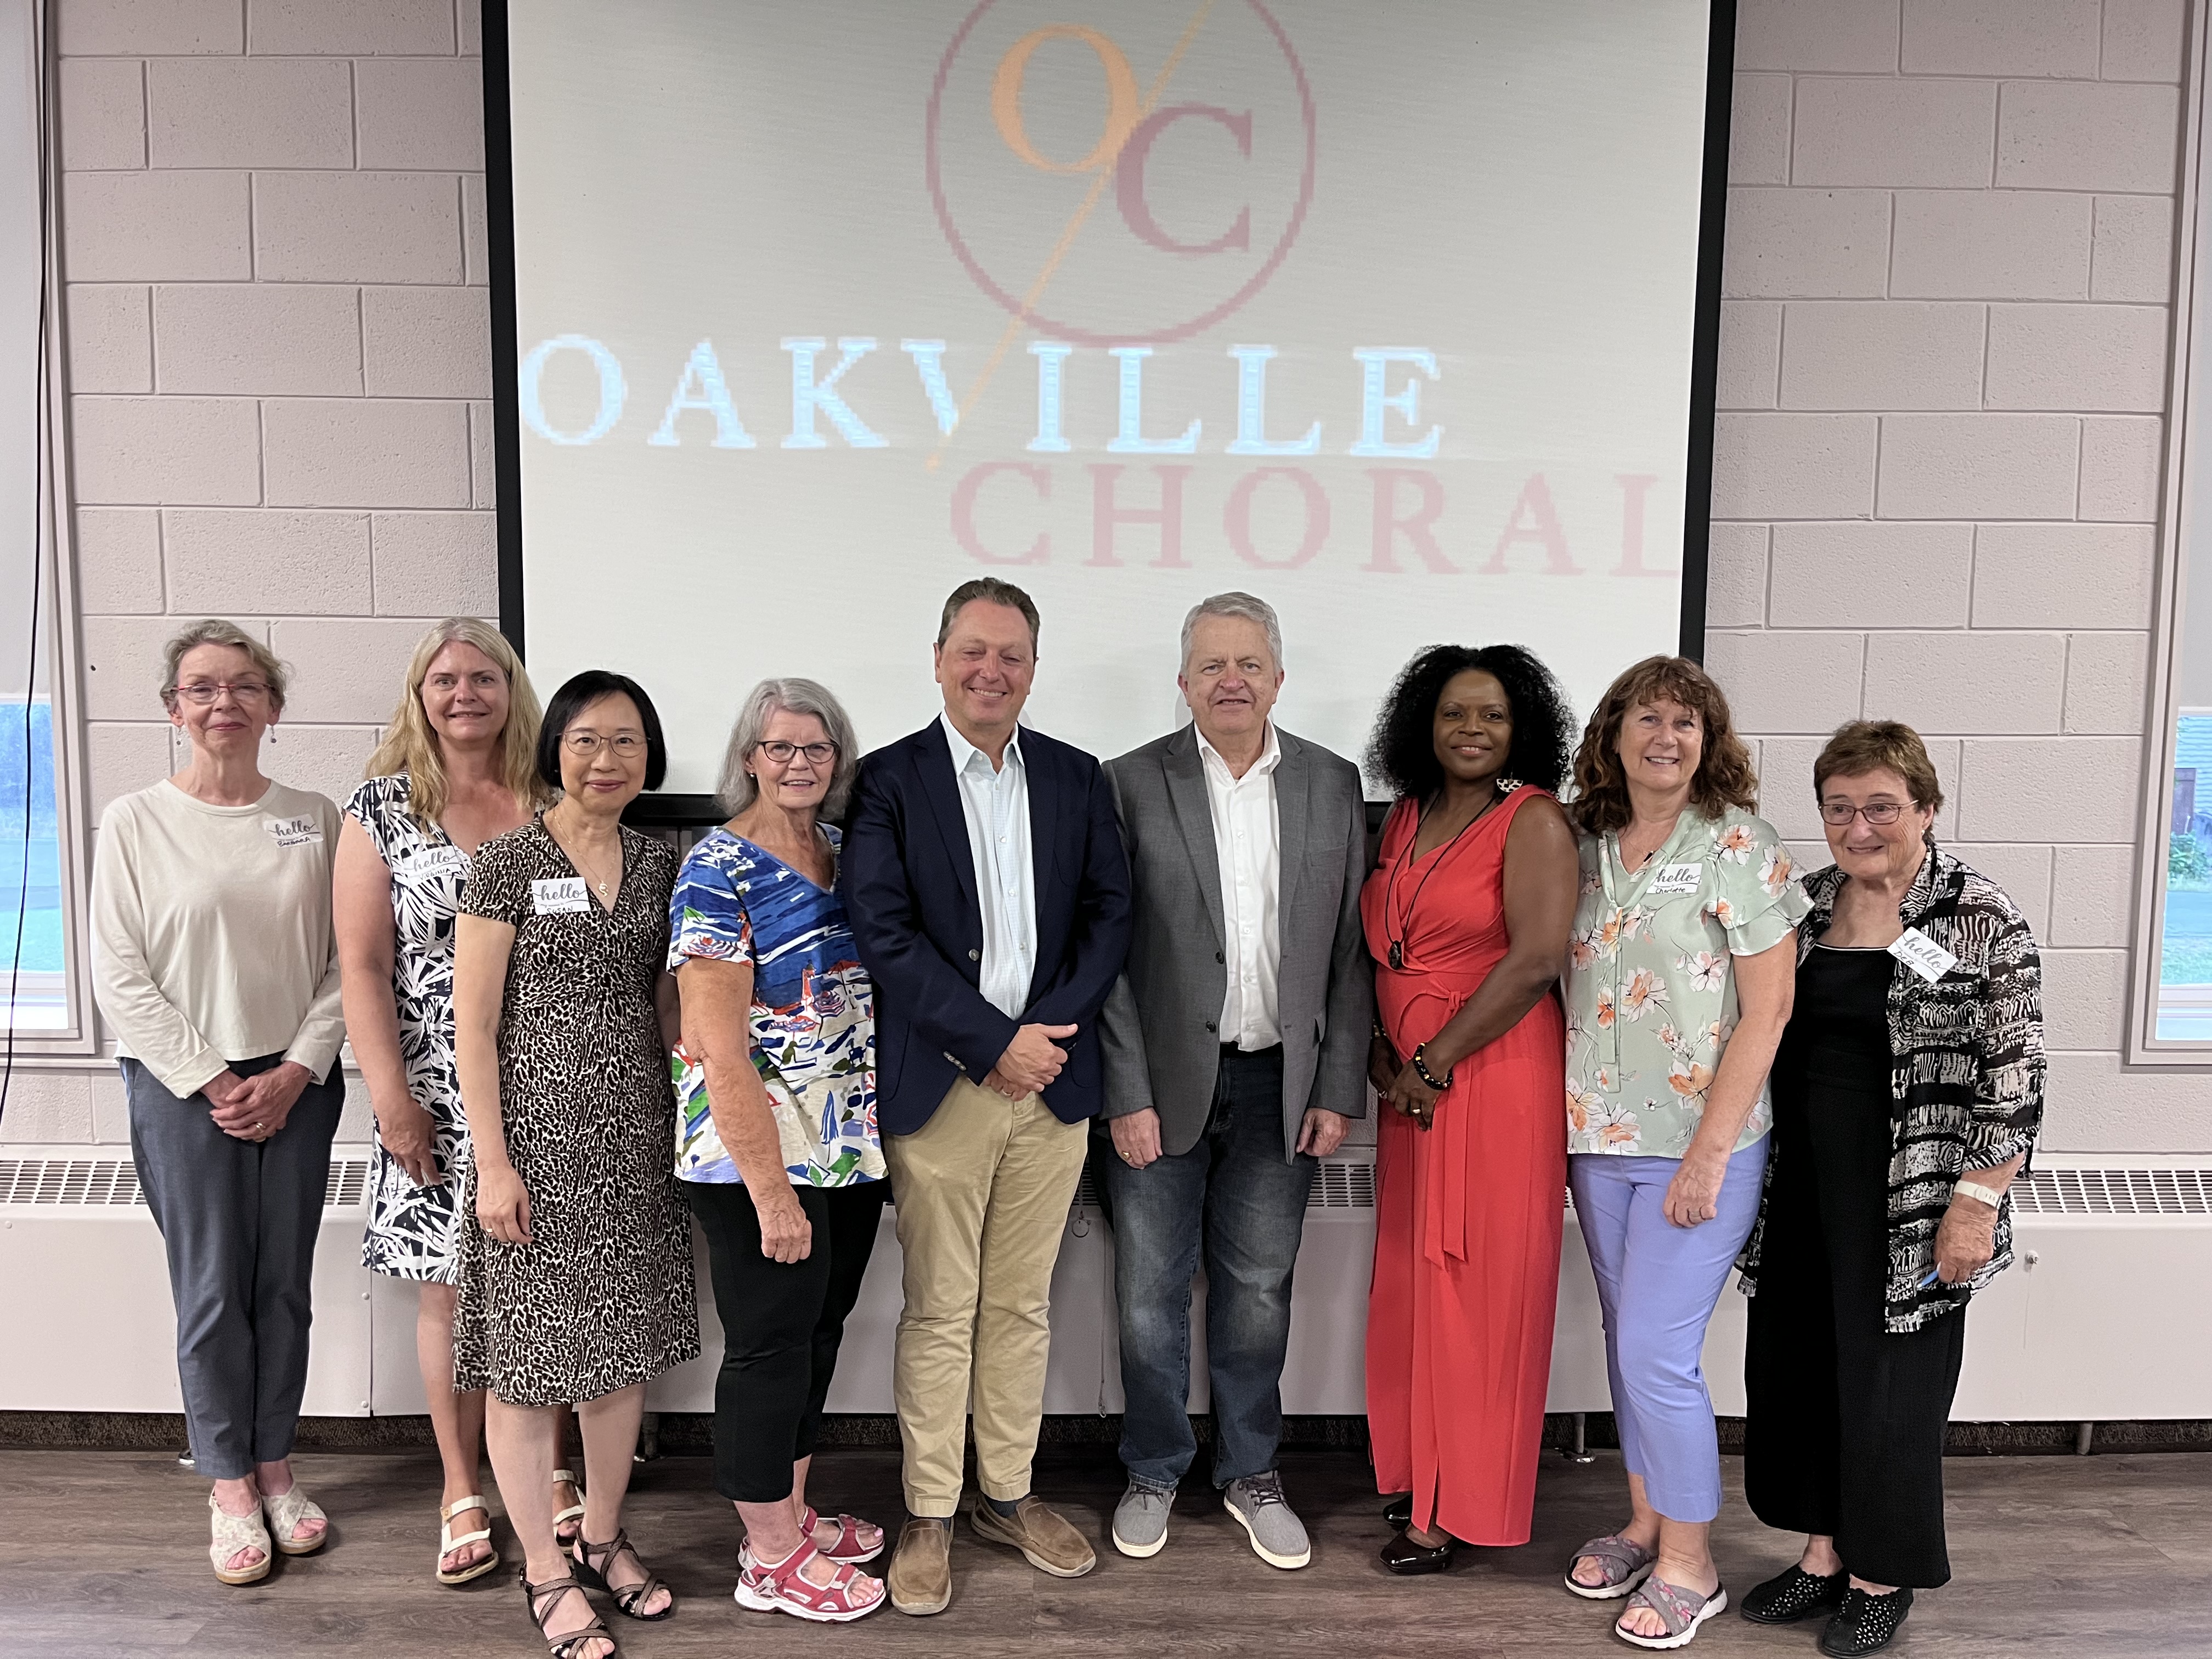 MP Stephen Crawford and Mayor Burton with members of the Oakville Choral Society | Oakville Choral Society